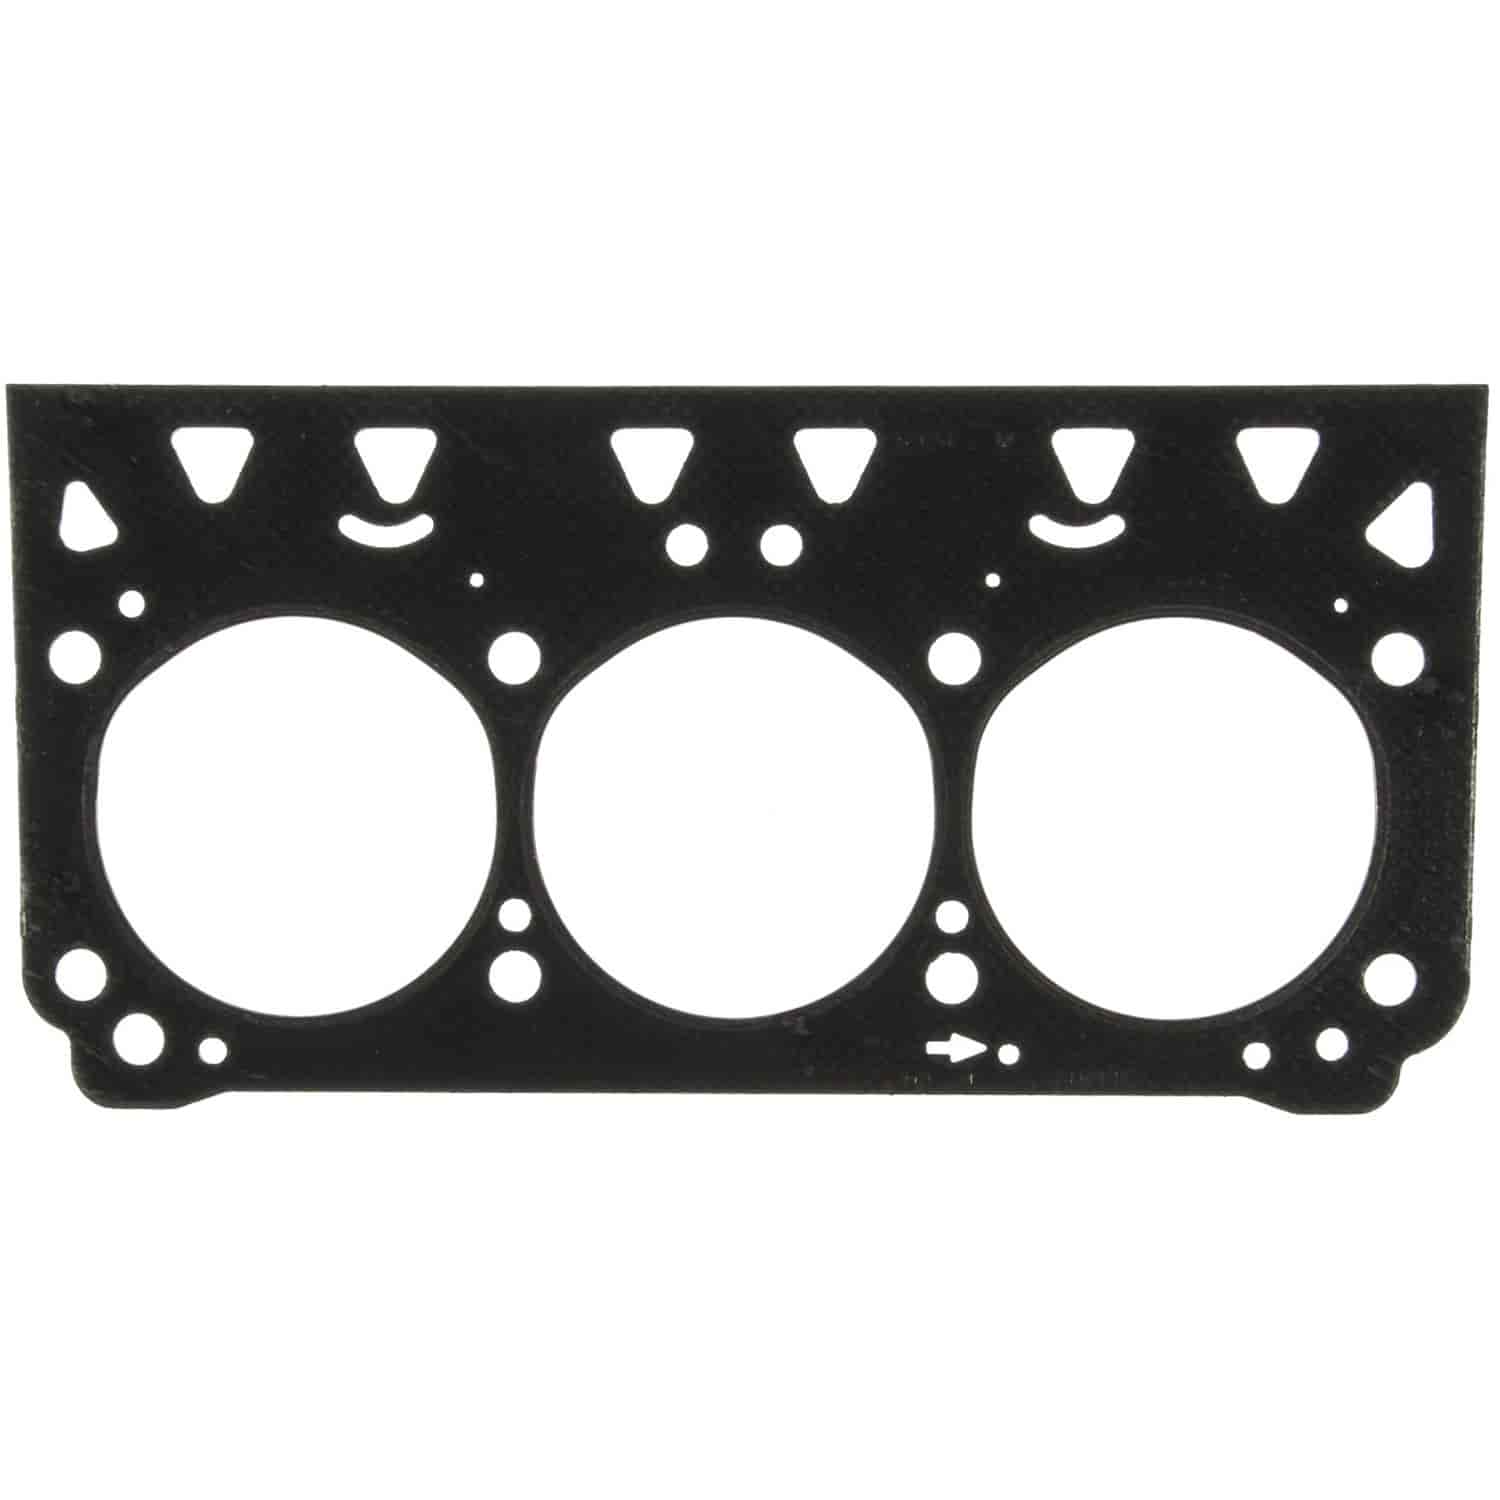 Cylinder Head Gasket Right GM 231 3.8L VIN 1 Supercharged Eng. 1996-03 .Right Hand